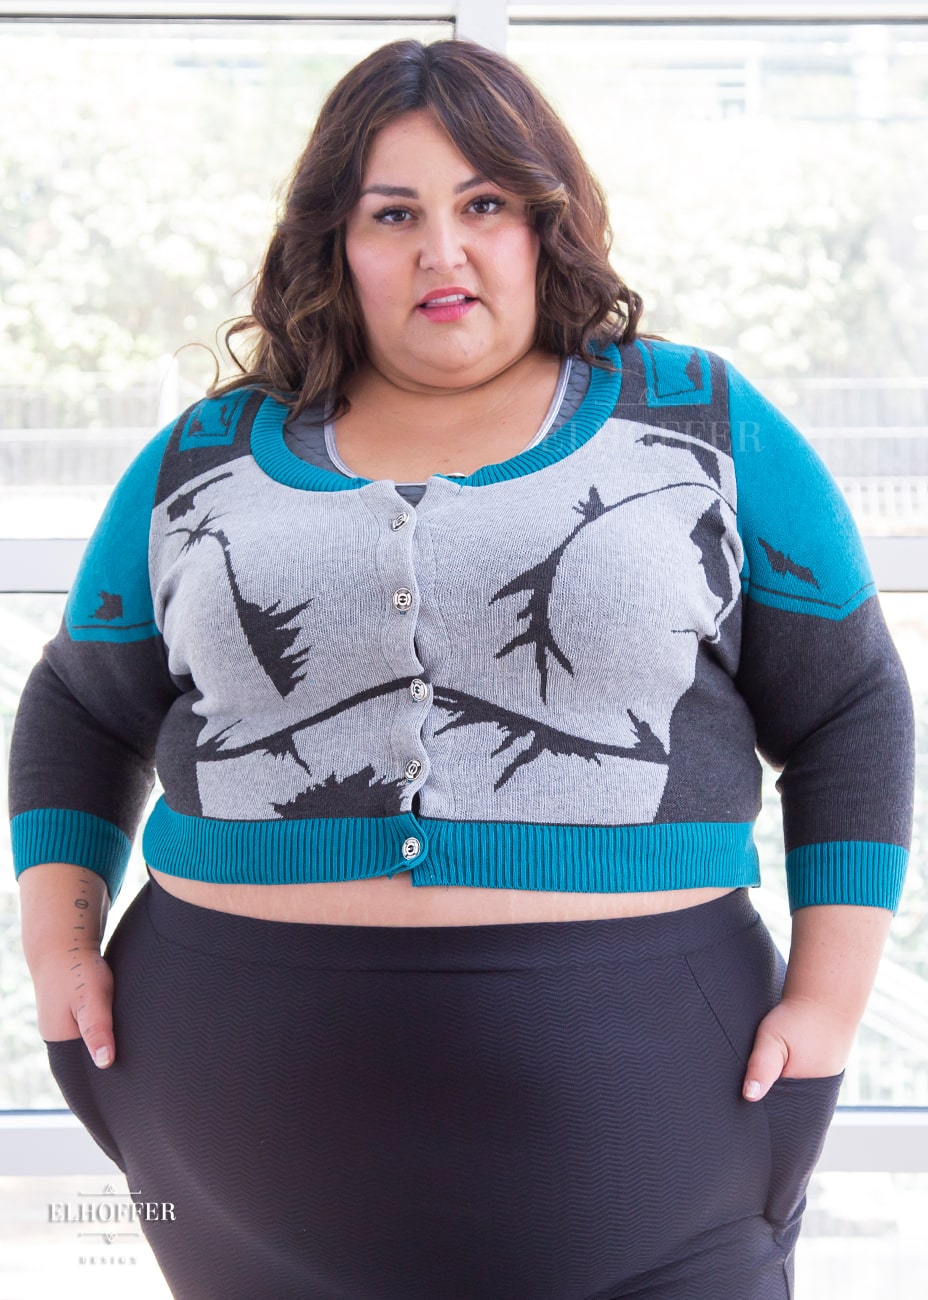 Kristen, a sun kissed skin 4xl model with long wavy brown hair, is wearing a cropped button up knit cardigan with 3/4 sleeves. The cardigan front is mainly a light grey with dark grey decorative lines that give the impression of battle damaged armor, with teal at the shoulders, and the bottom half of the sleeve and back of the cardigan are a dark grey. The neckine, bottom, and cuffs are all teal ribbing.